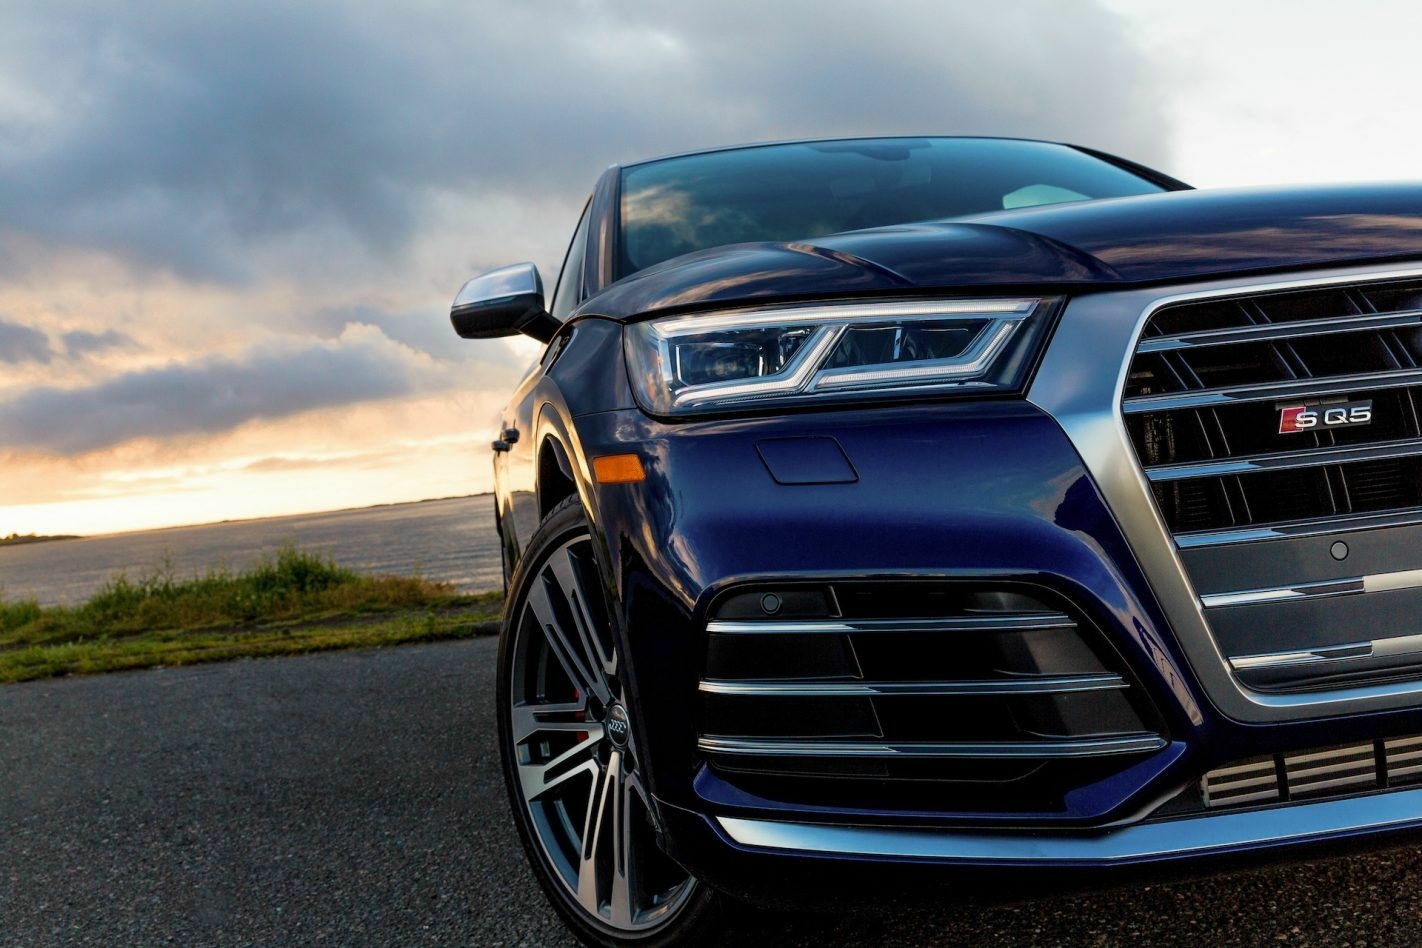 Audi Q5 HD Wallpaper Background Image Photos Pictures Yl